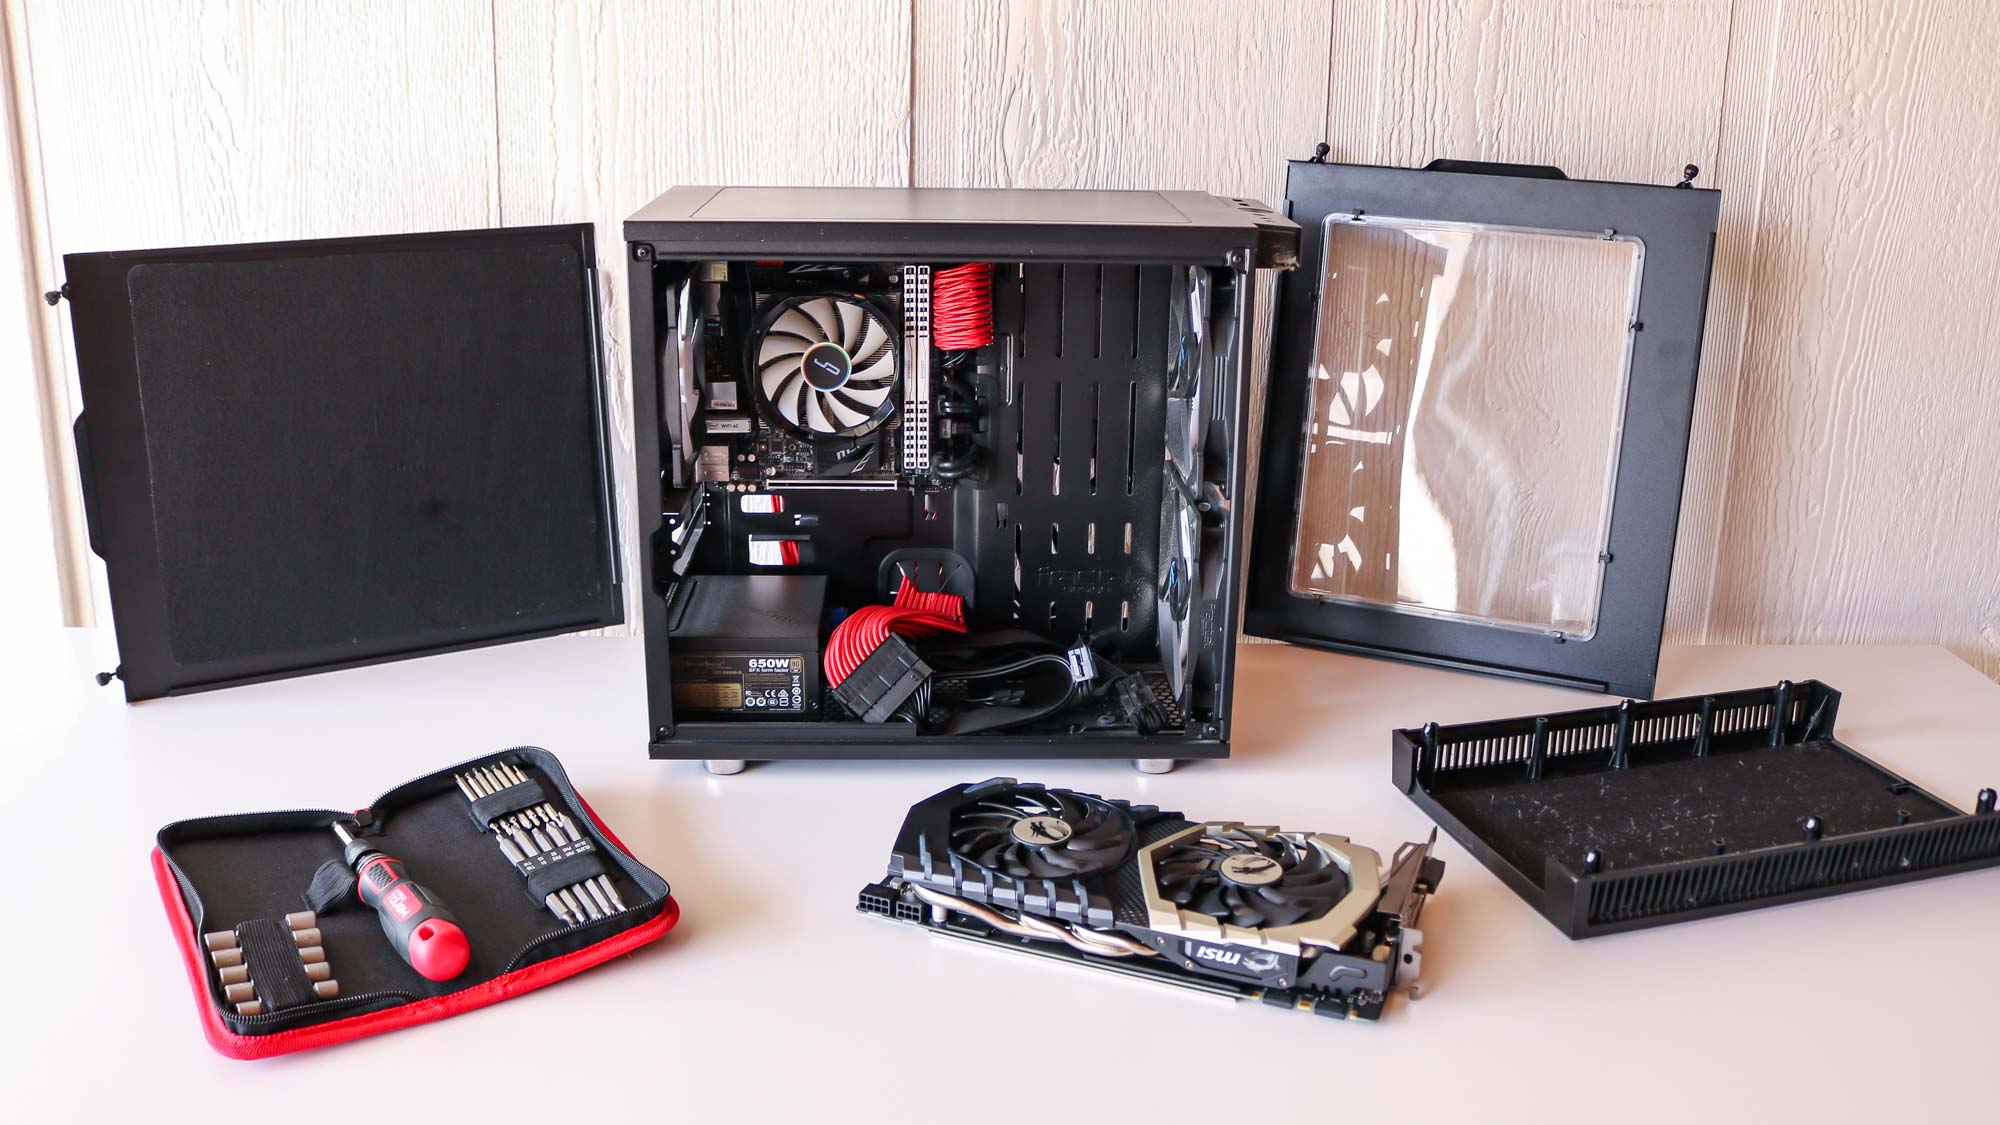 How to tidy cables, reassemble your PC case and connect